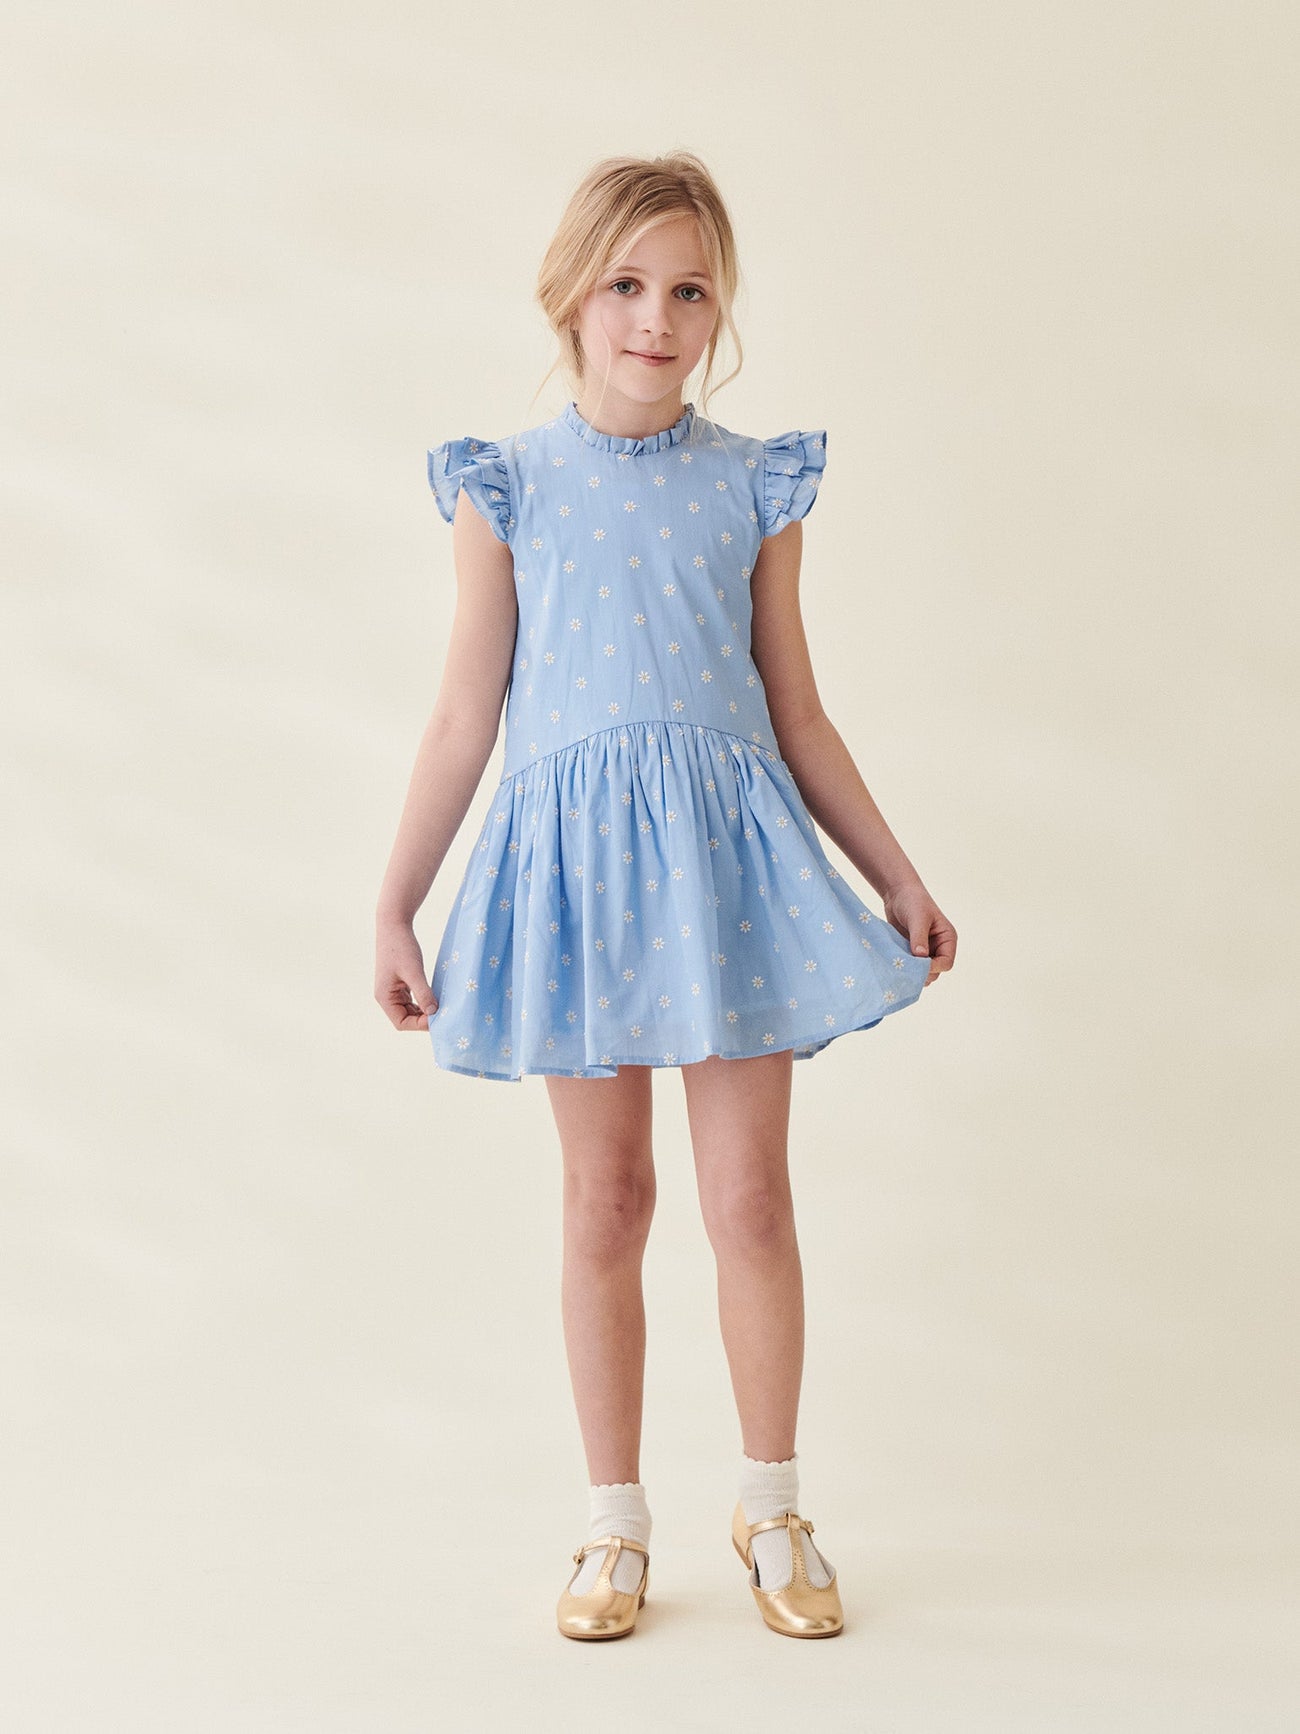  Blue Frock For Kids With Leggings For Style / Cute